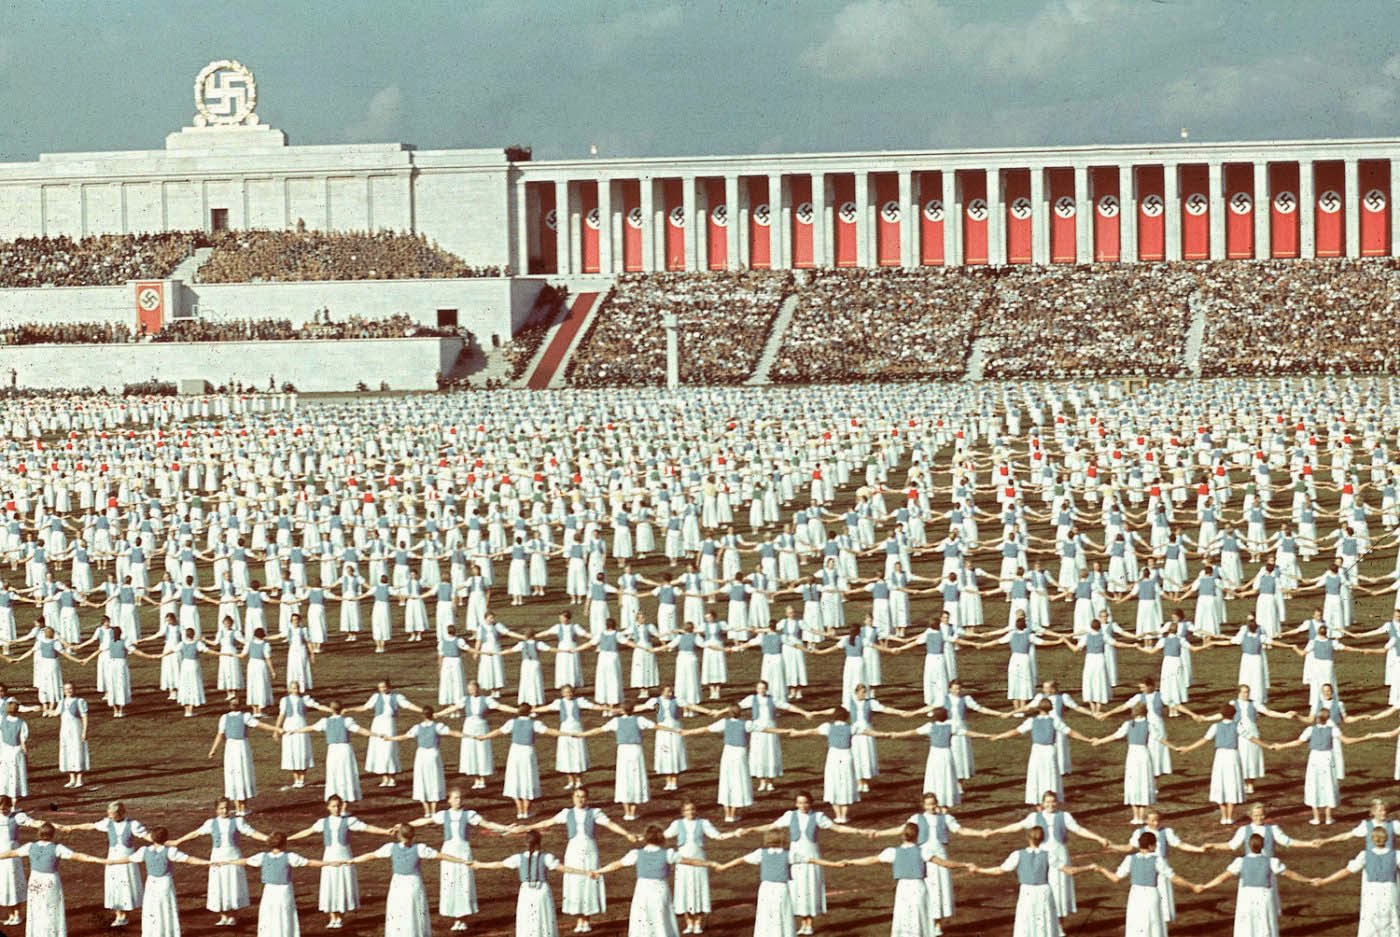 League of German Girls dancing during the 1938 Reich Party Congress, Nuremberg, Germany..jpg